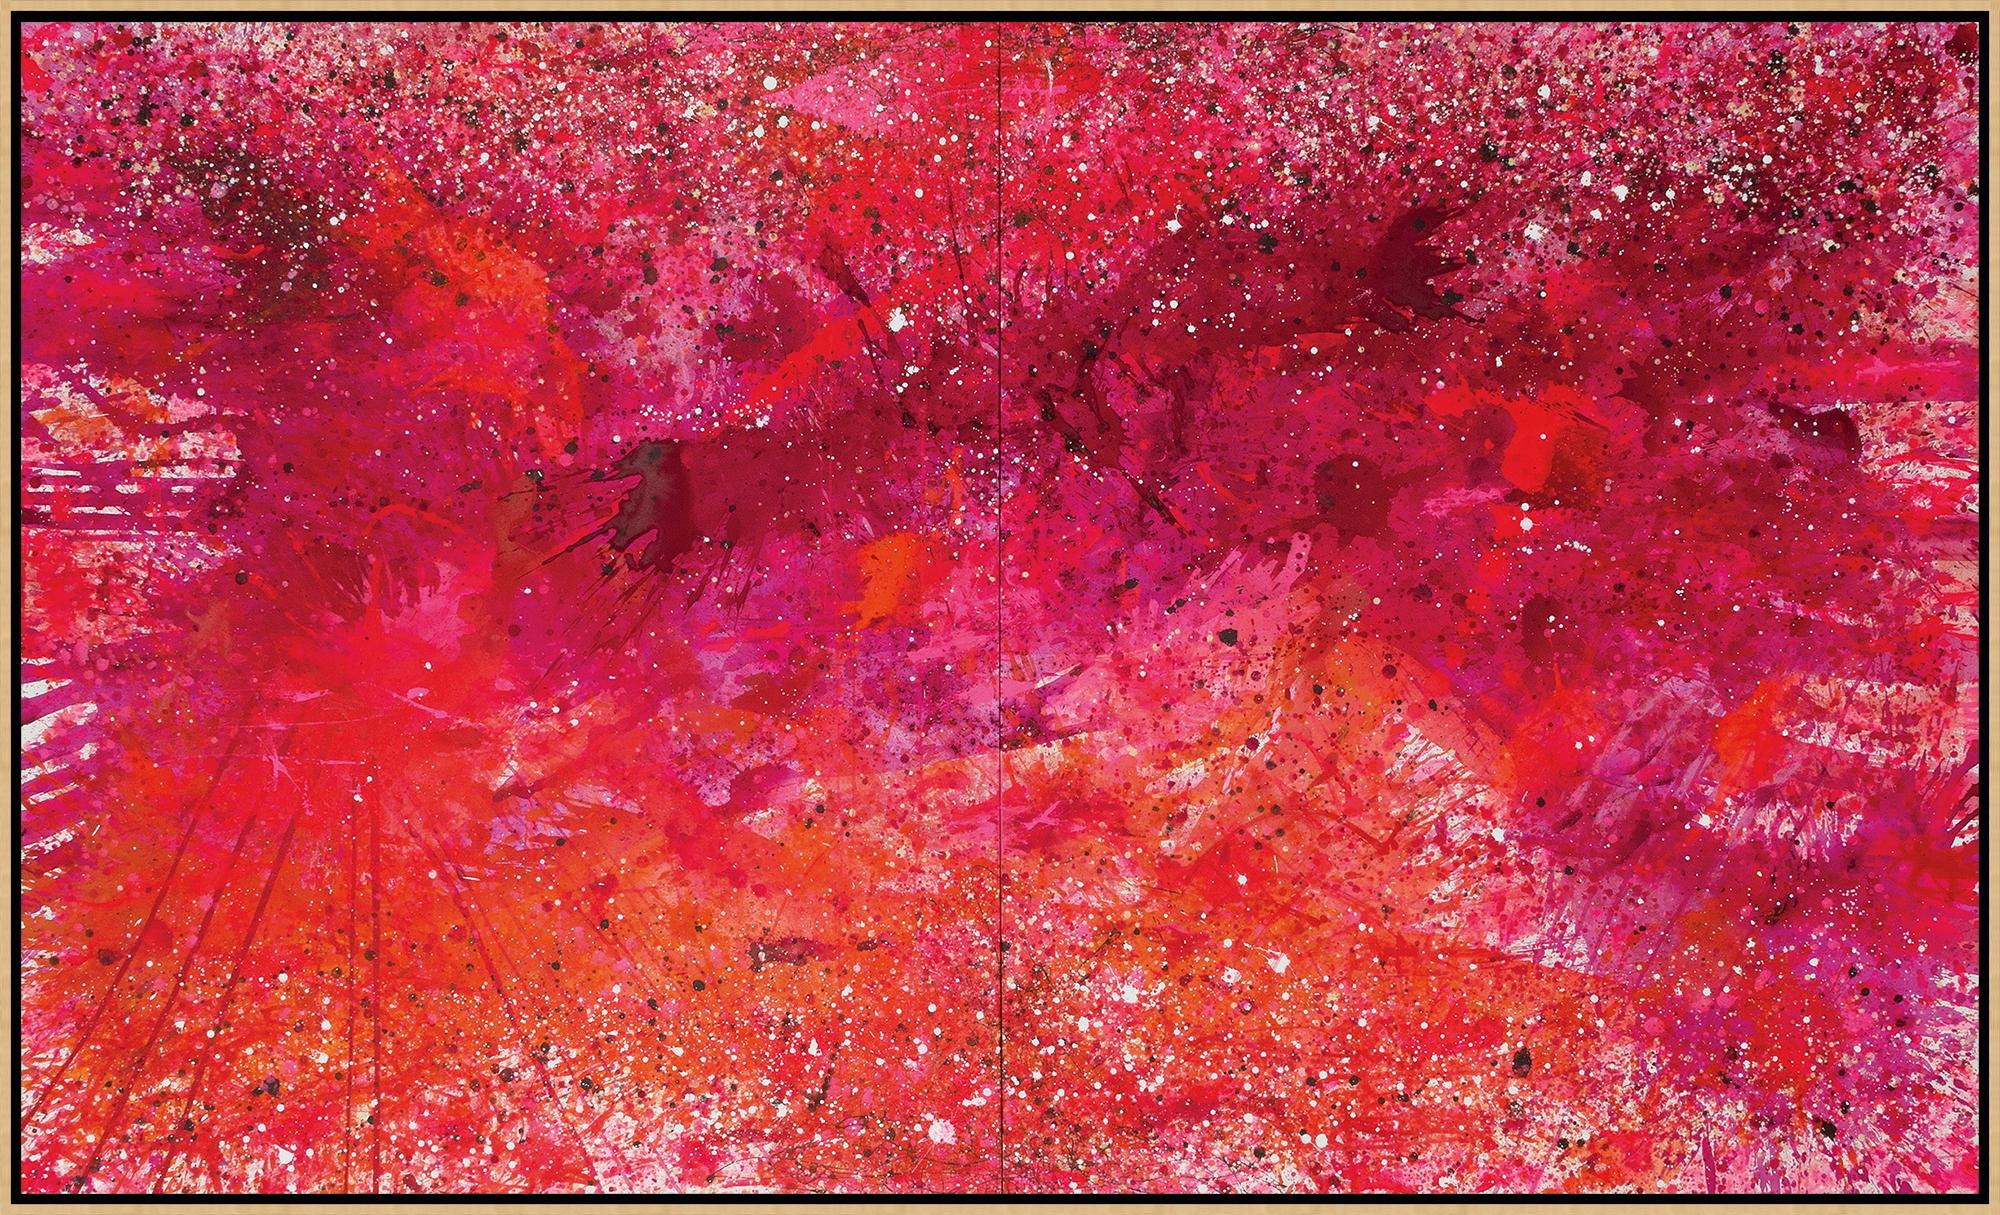 J. Steven Manolis Abstract Painting - Pink and Red Flamingo, Key West, Florida Contemporary Abstract Expressionist